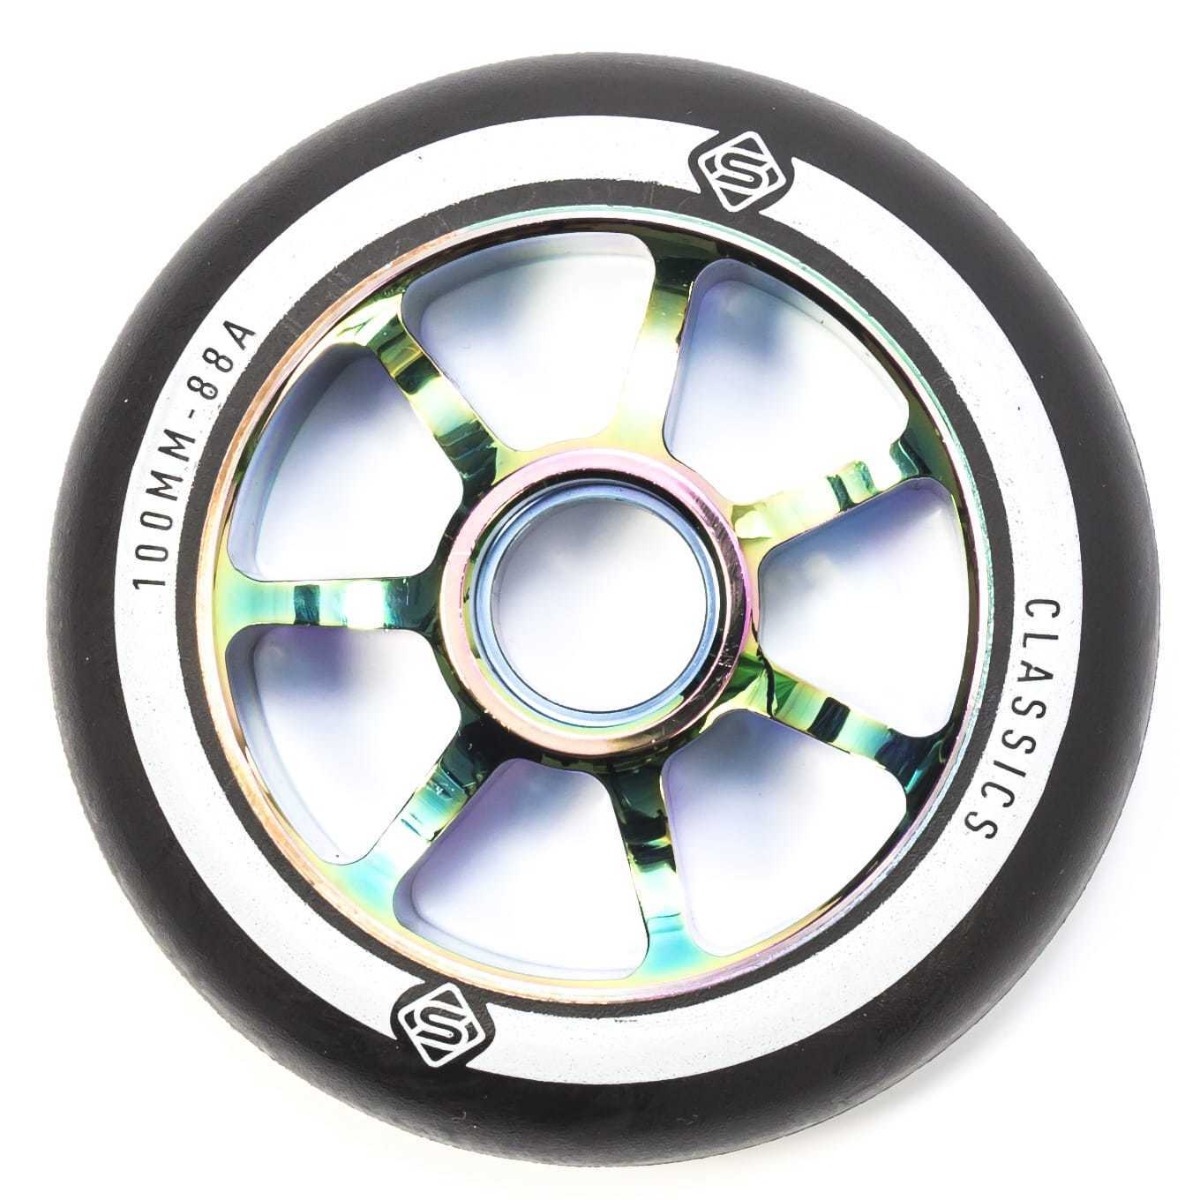 An image of Skates Classic 120mm Stunt Scooter Wheel - Neochrome Oil Slick